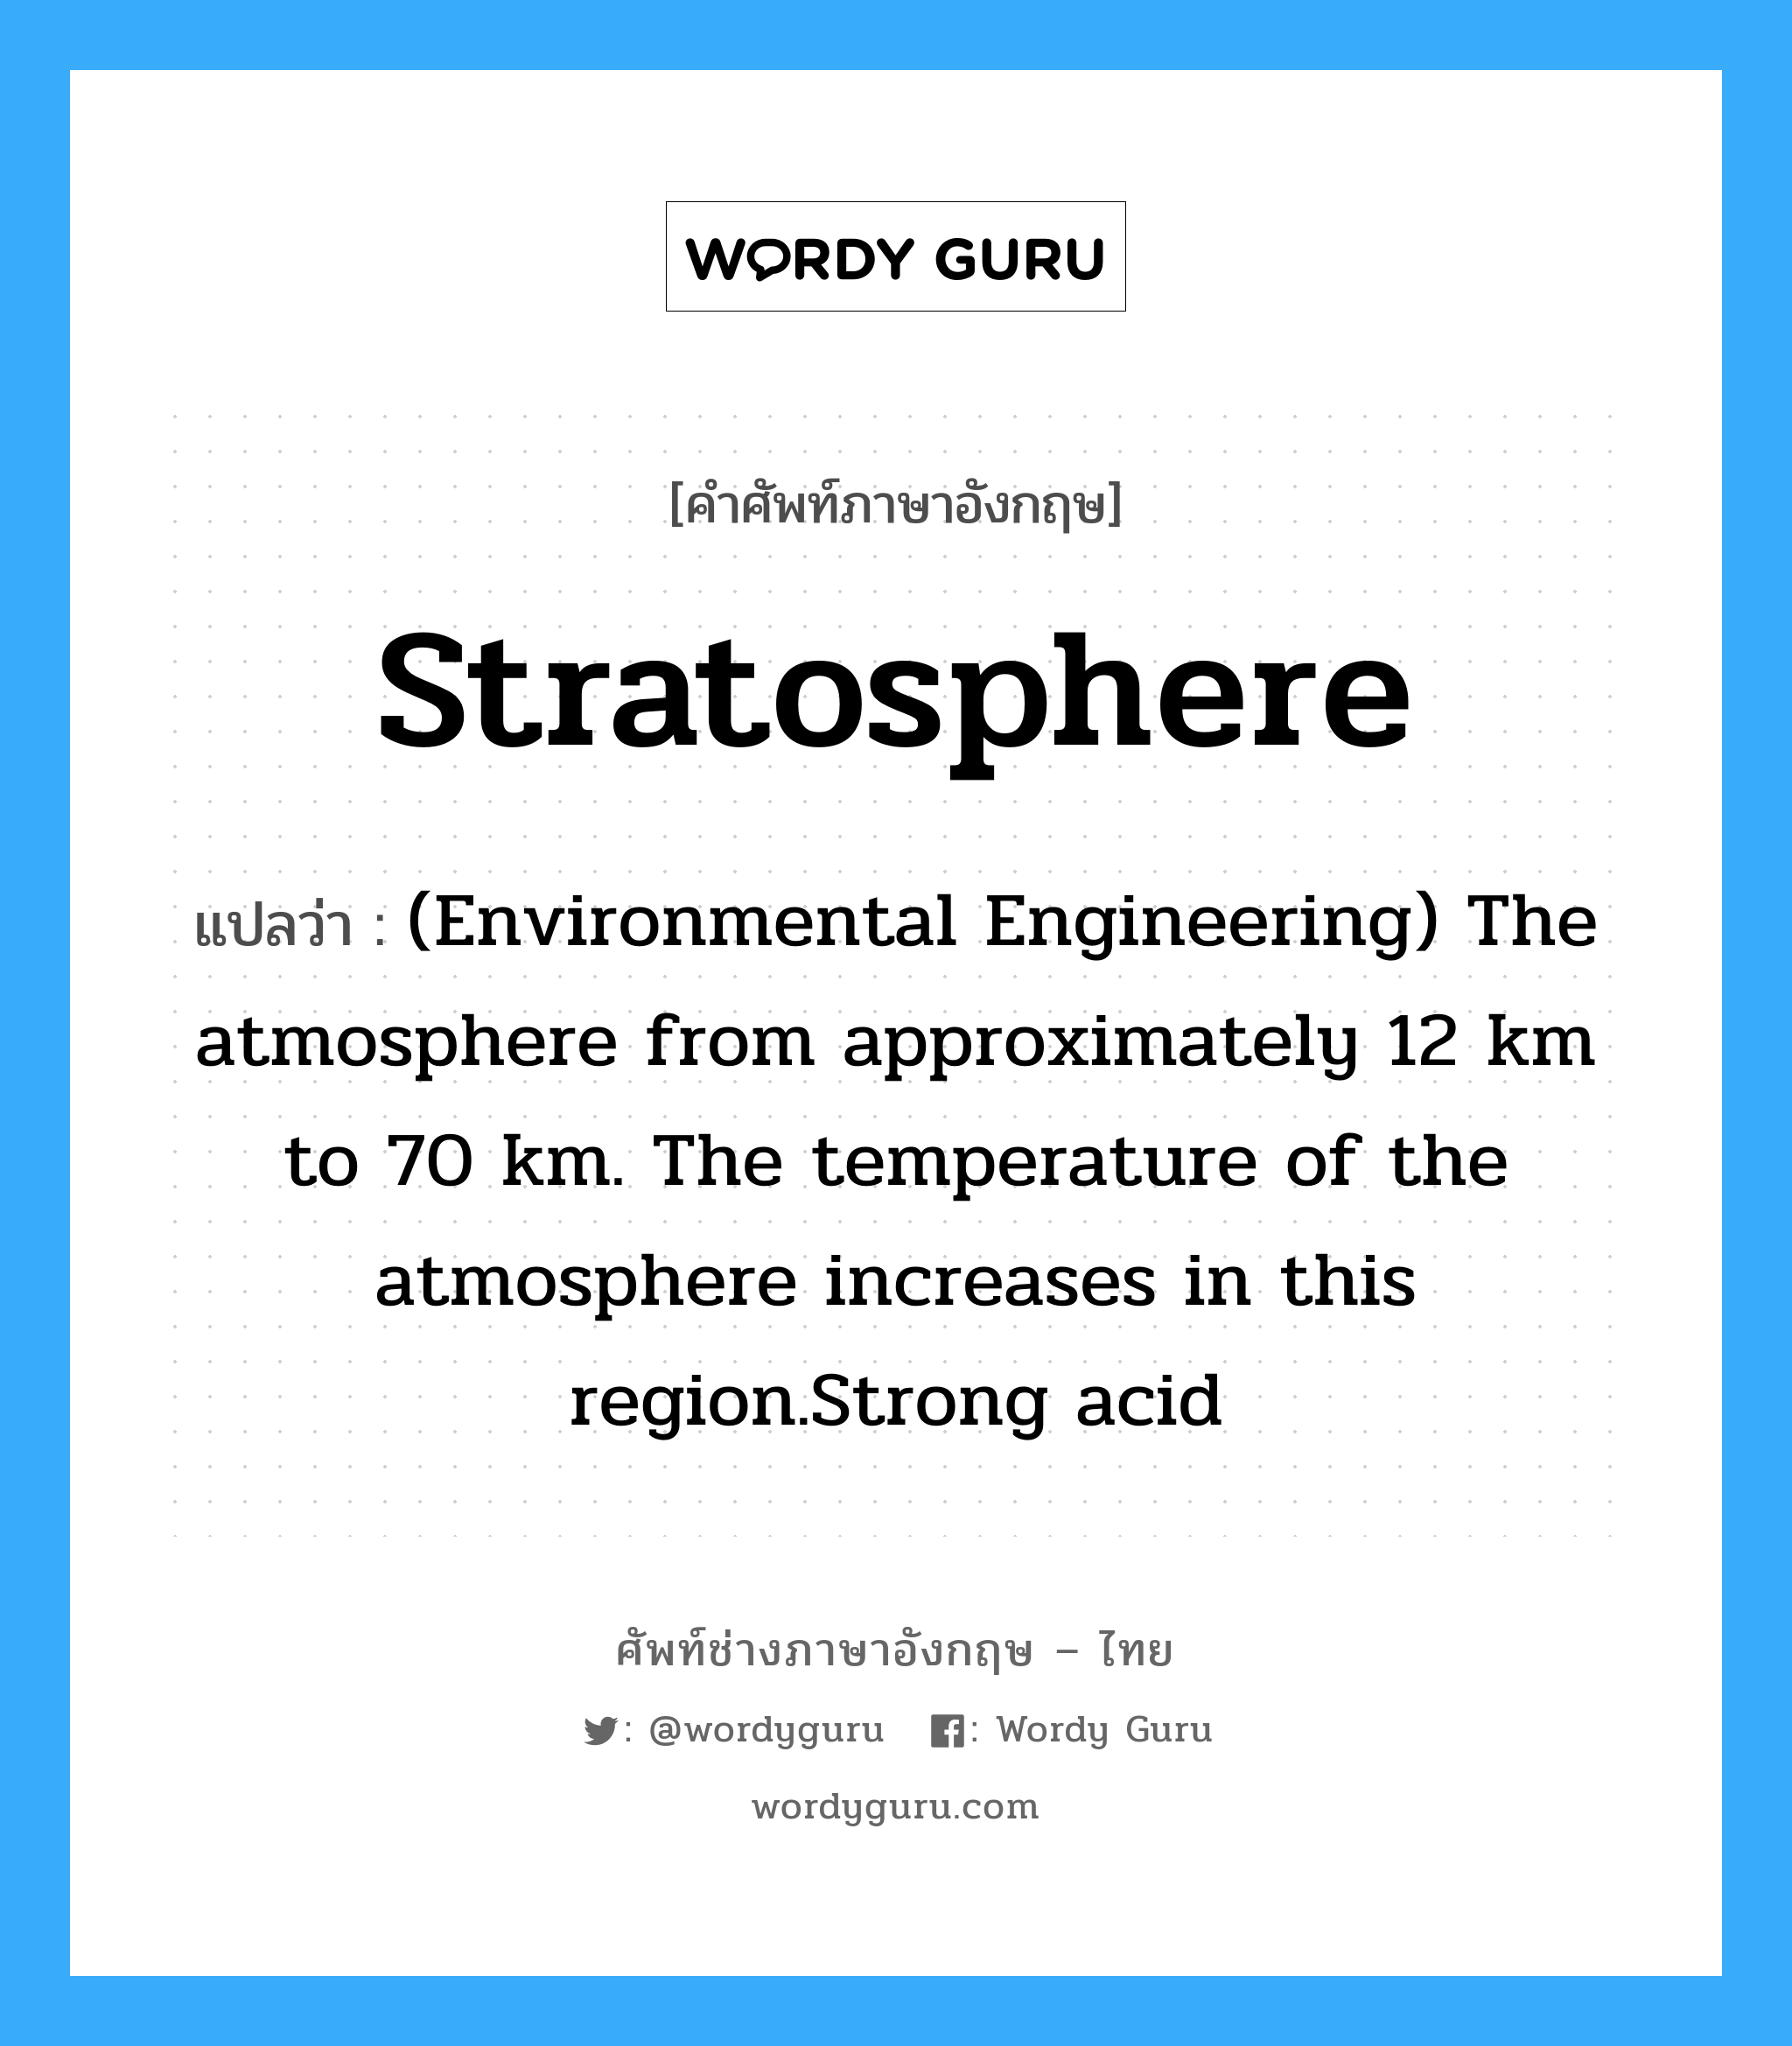 Stratosphere แปลว่า?, คำศัพท์ช่างภาษาอังกฤษ - ไทย Stratosphere คำศัพท์ภาษาอังกฤษ Stratosphere แปลว่า (Environmental Engineering) The atmosphere from approximately 12 km to 70 km. The temperature of the atmosphere increases in this region.Strong acid